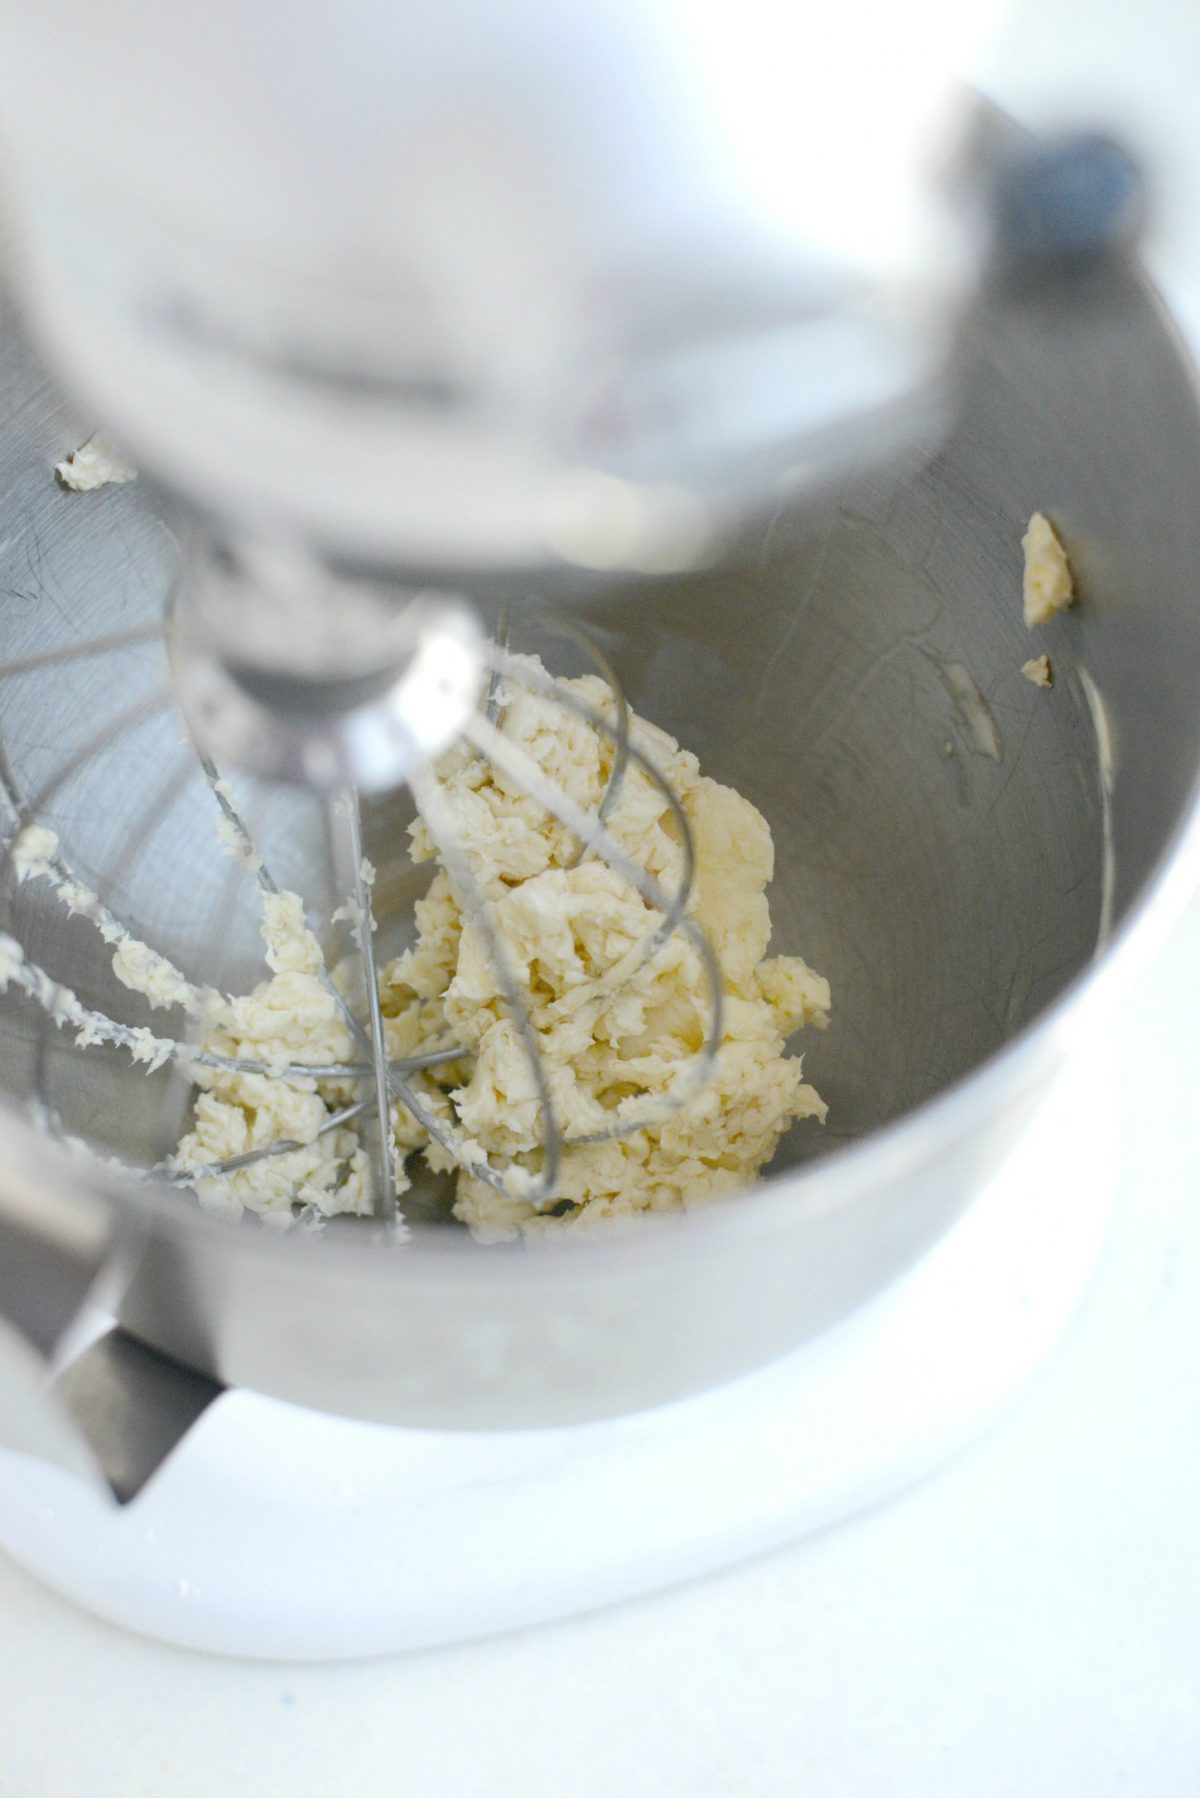 Cream butter until light and fluffy.